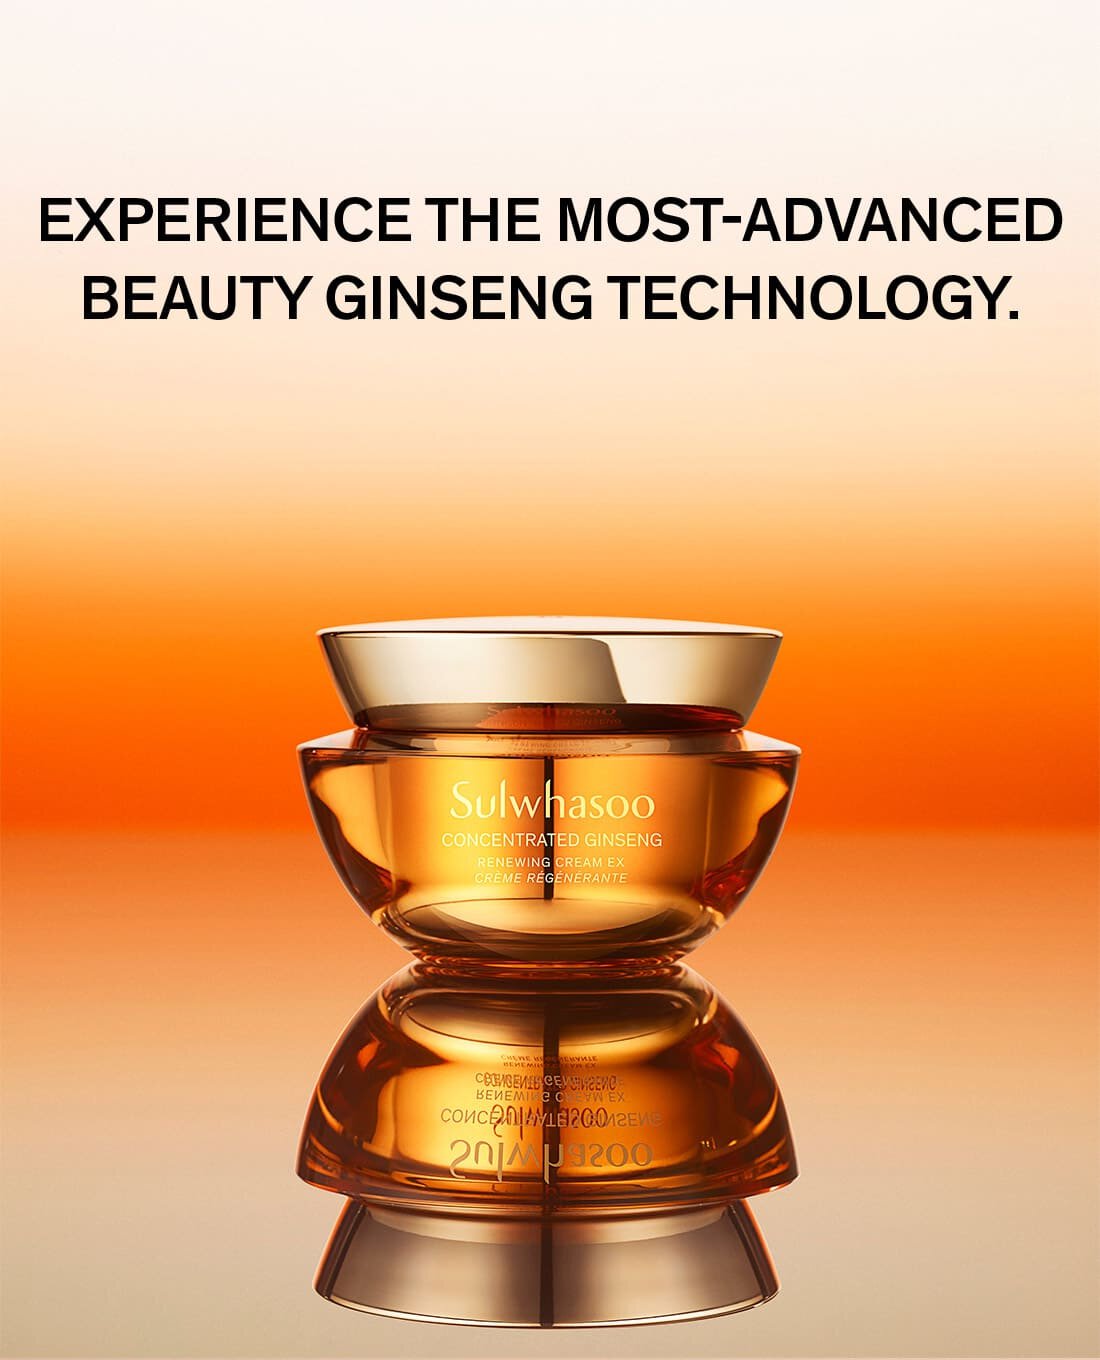 EXPERIENCE THE MOST-ADVANCED BEAUTY GINSENG TECHNOLOGY.